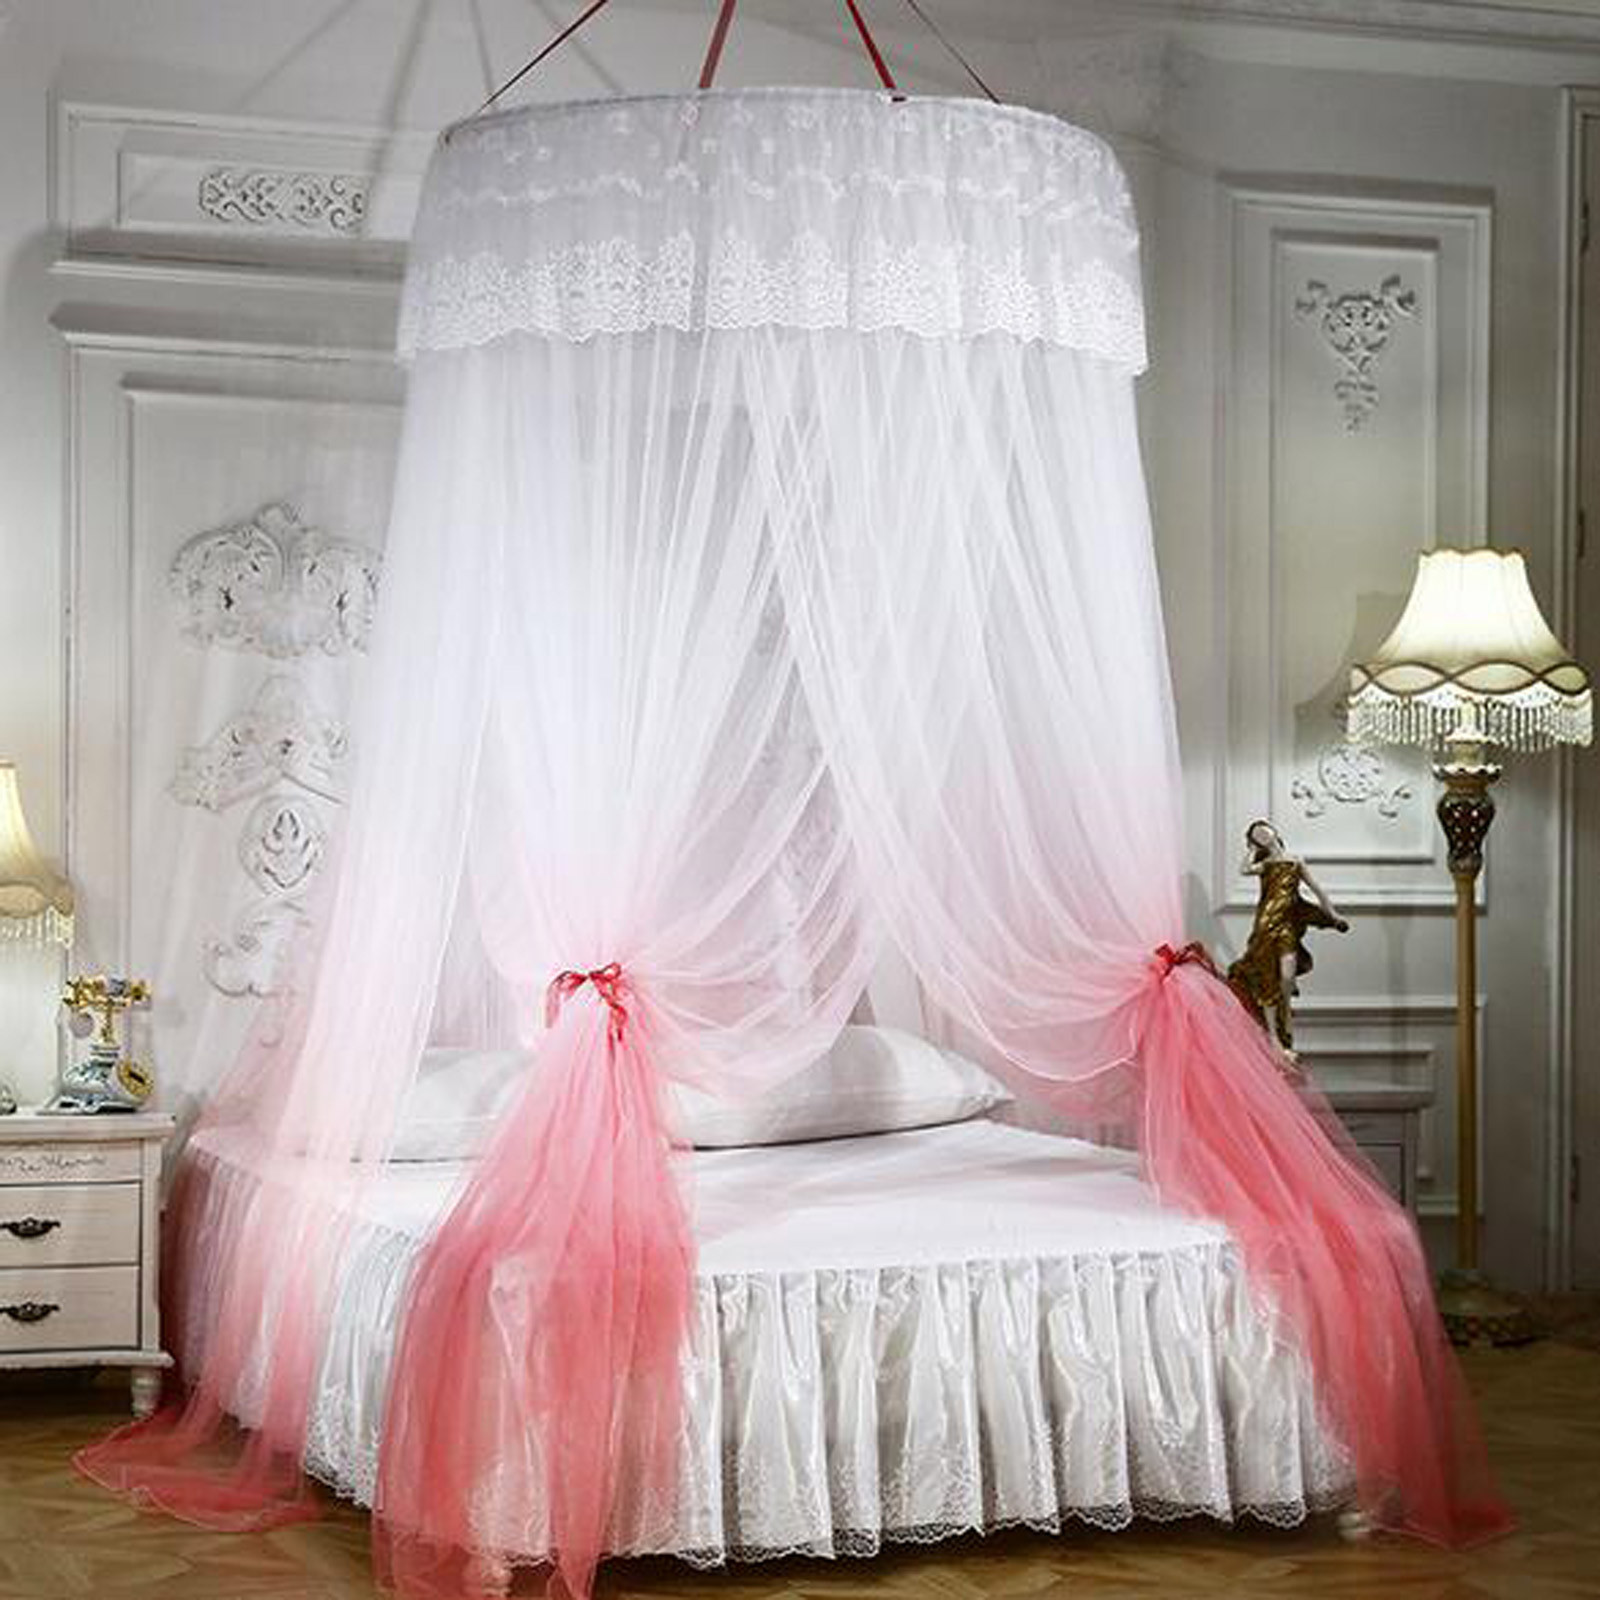 Bed Canopy Double Colors Hung Mosquito Net Princess Bed Tent Curtain Foldable Canopy On The Bed Elegant Fairy Lace Dossels